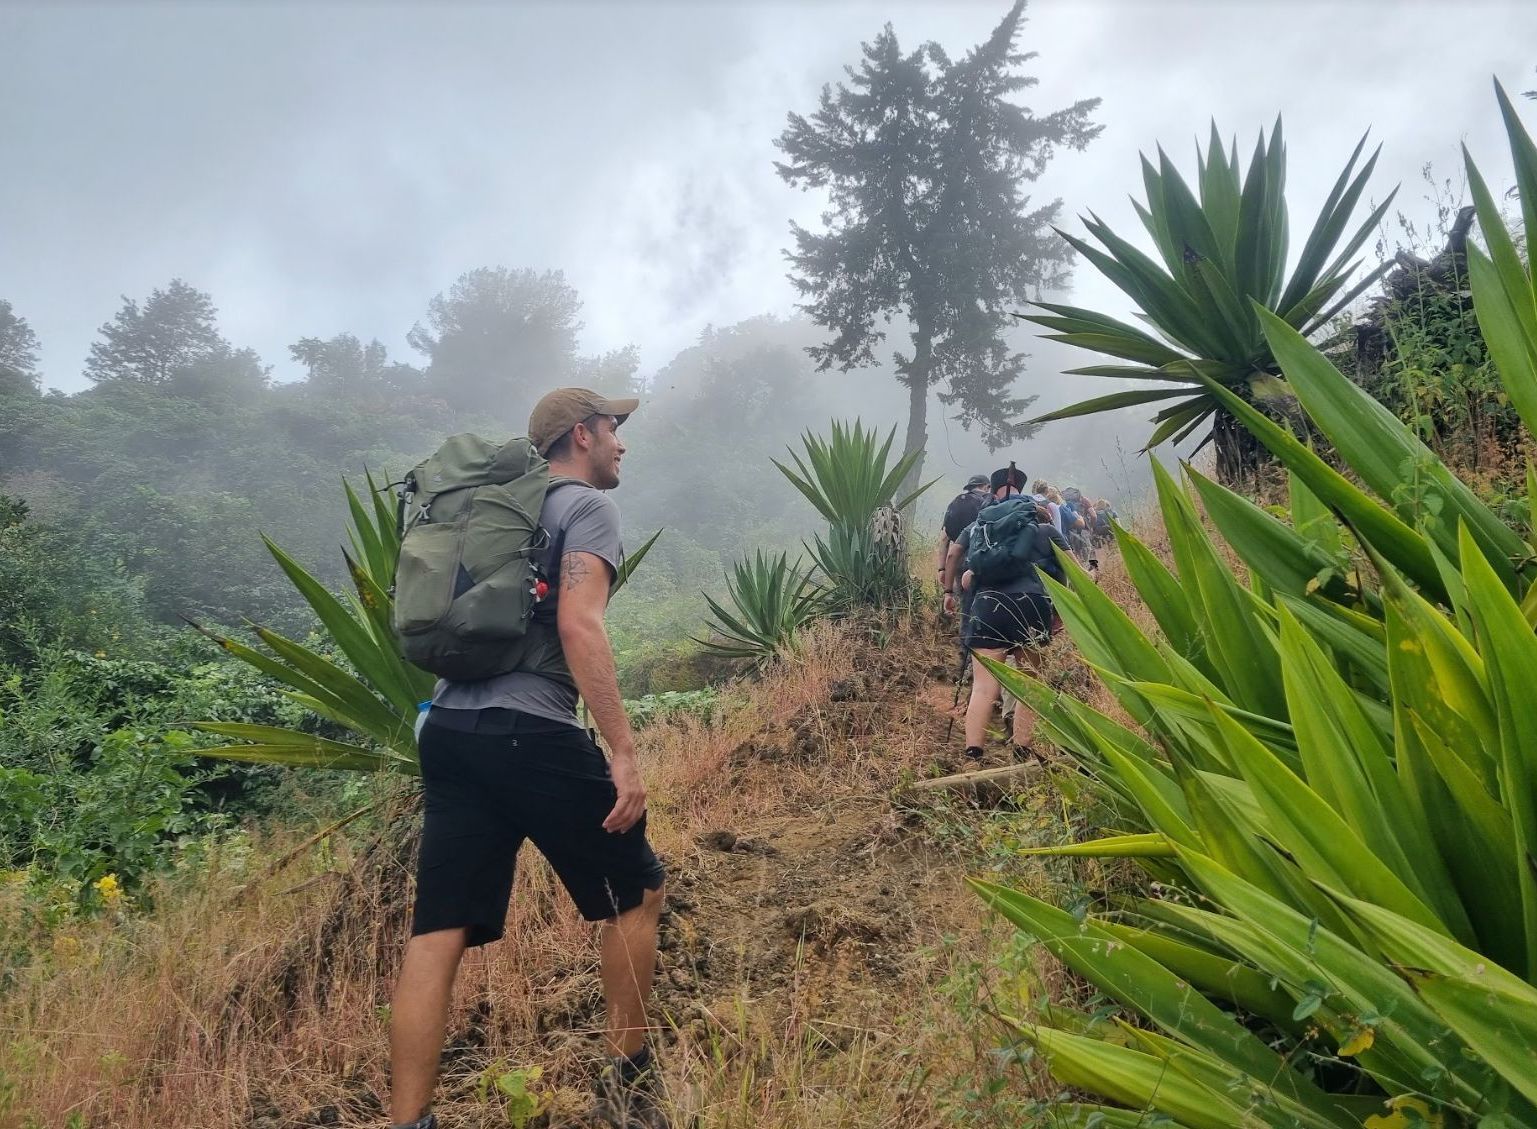 Hikers in the forests of Fogo, an island of Cape Verde